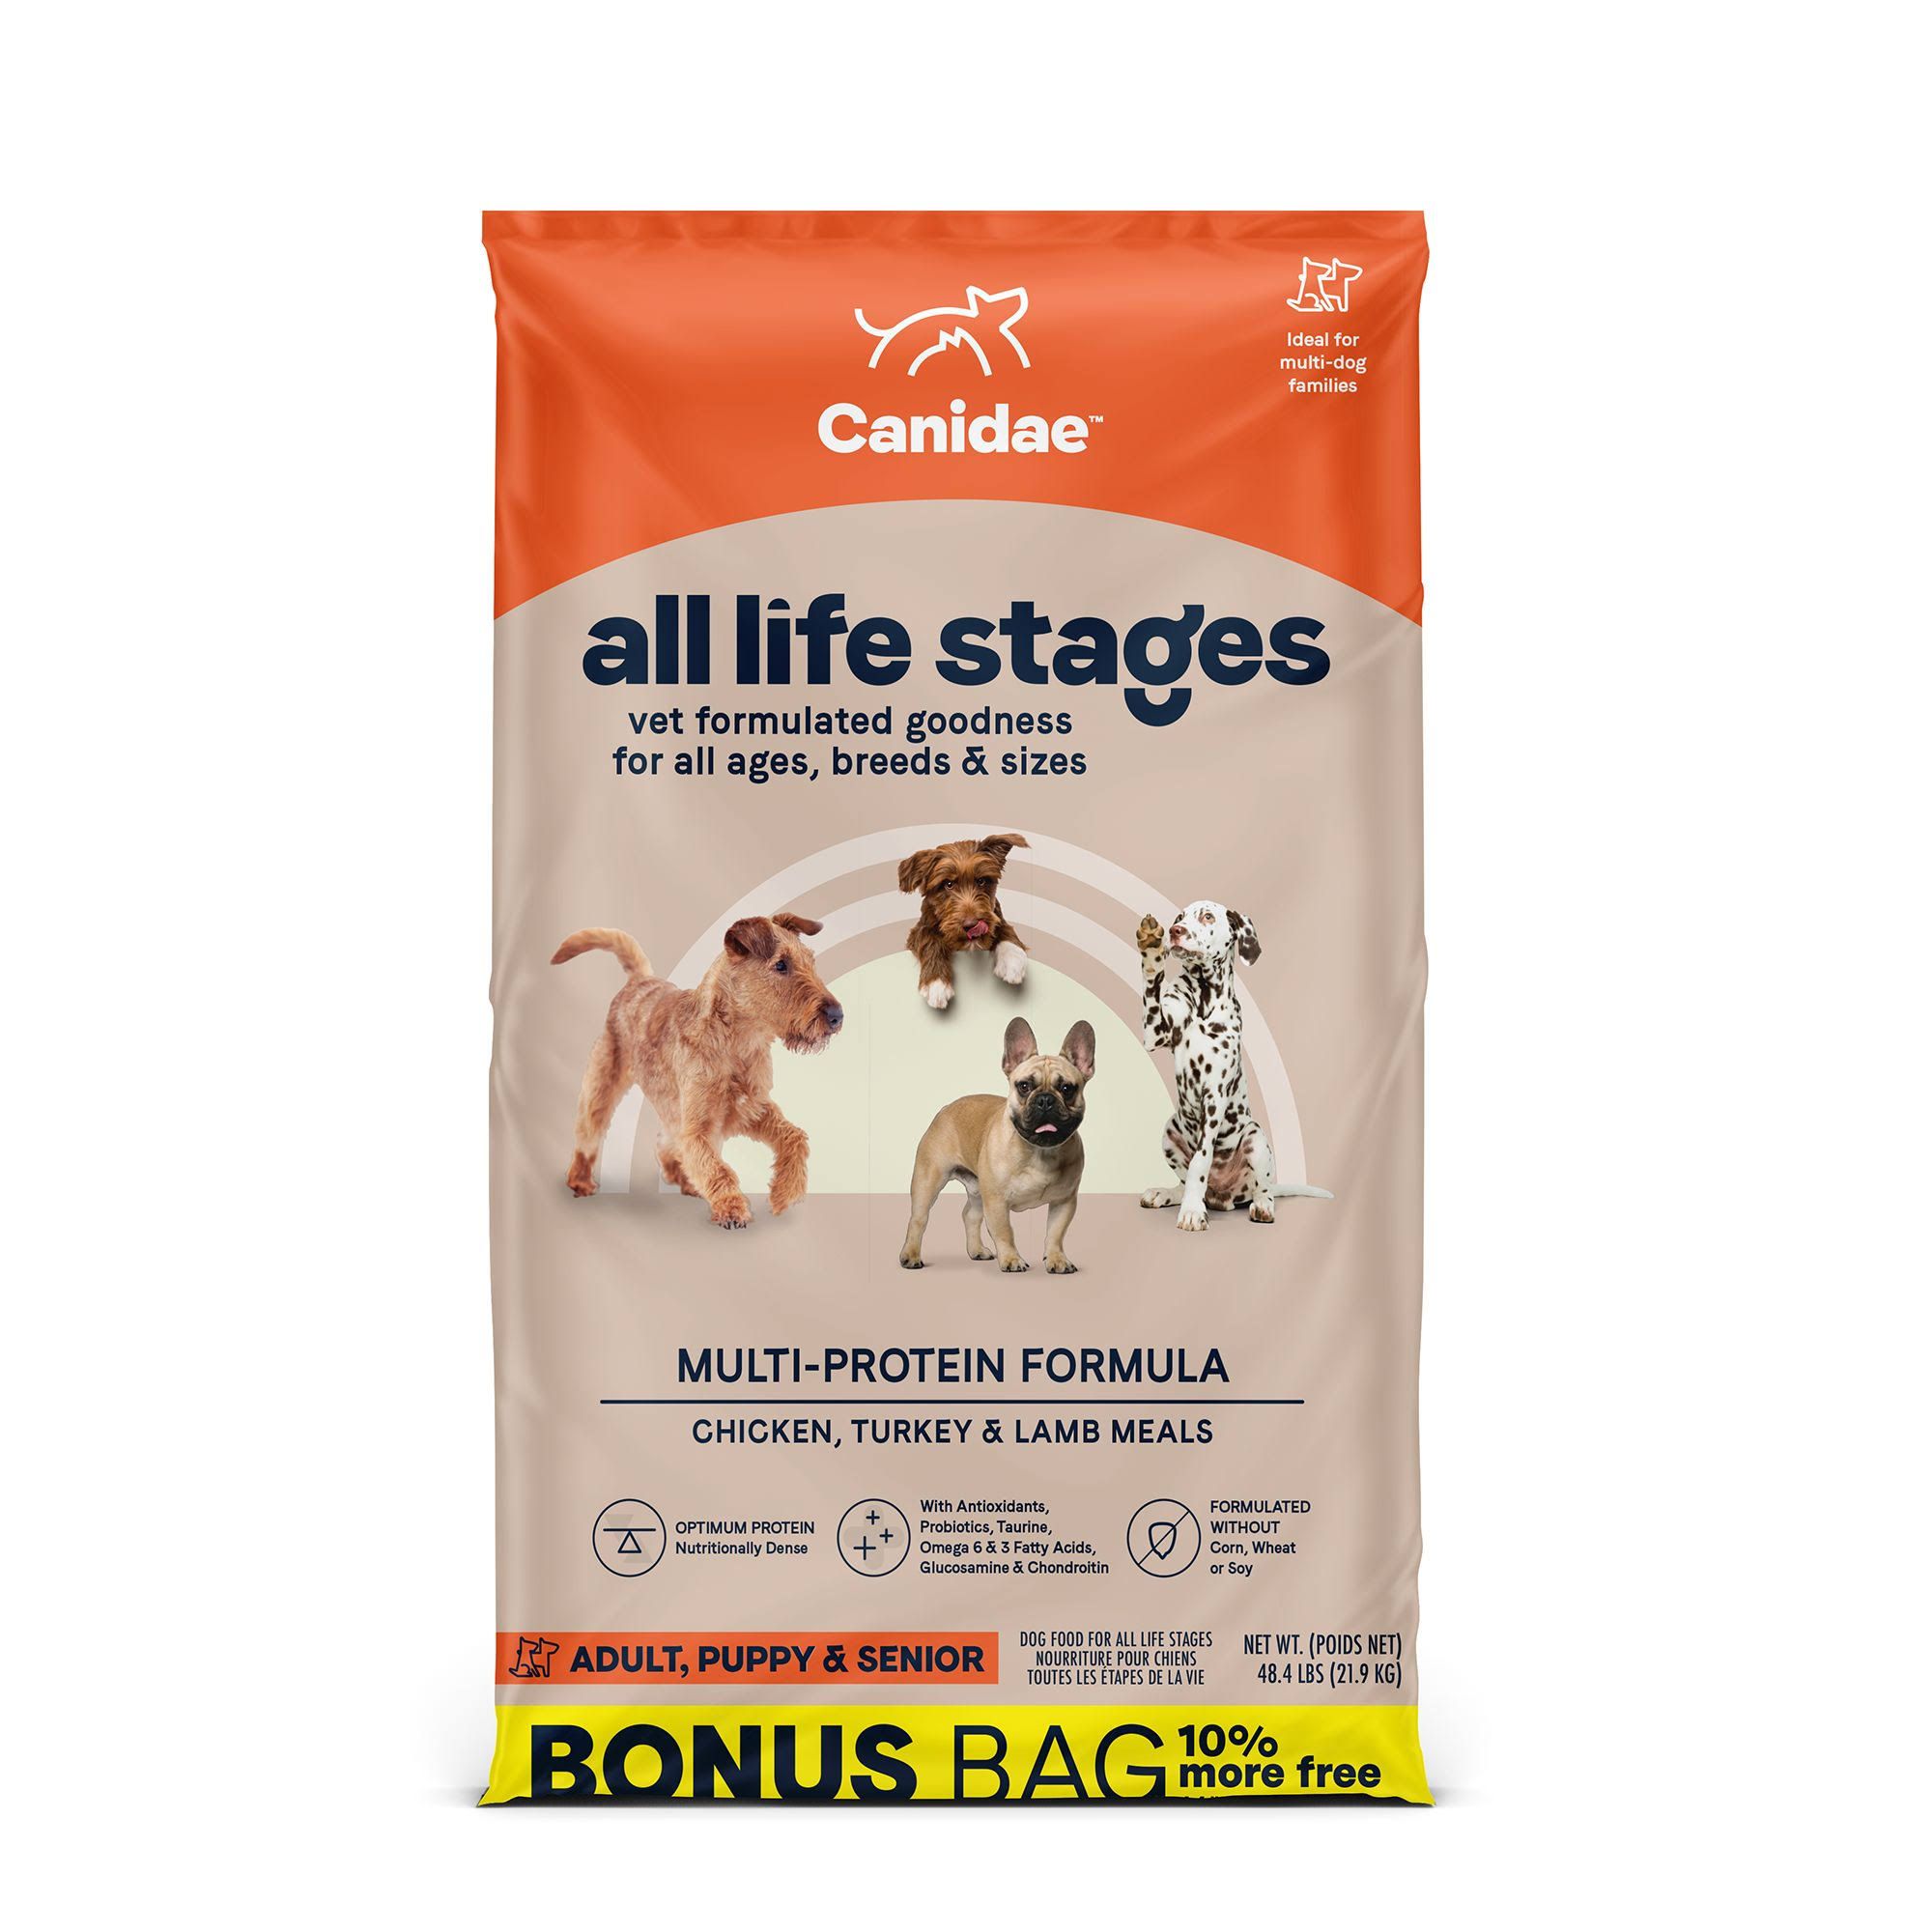 Canidae All Life Stages Multi-Protein Formula Dry Dog Food, 48.4lbs